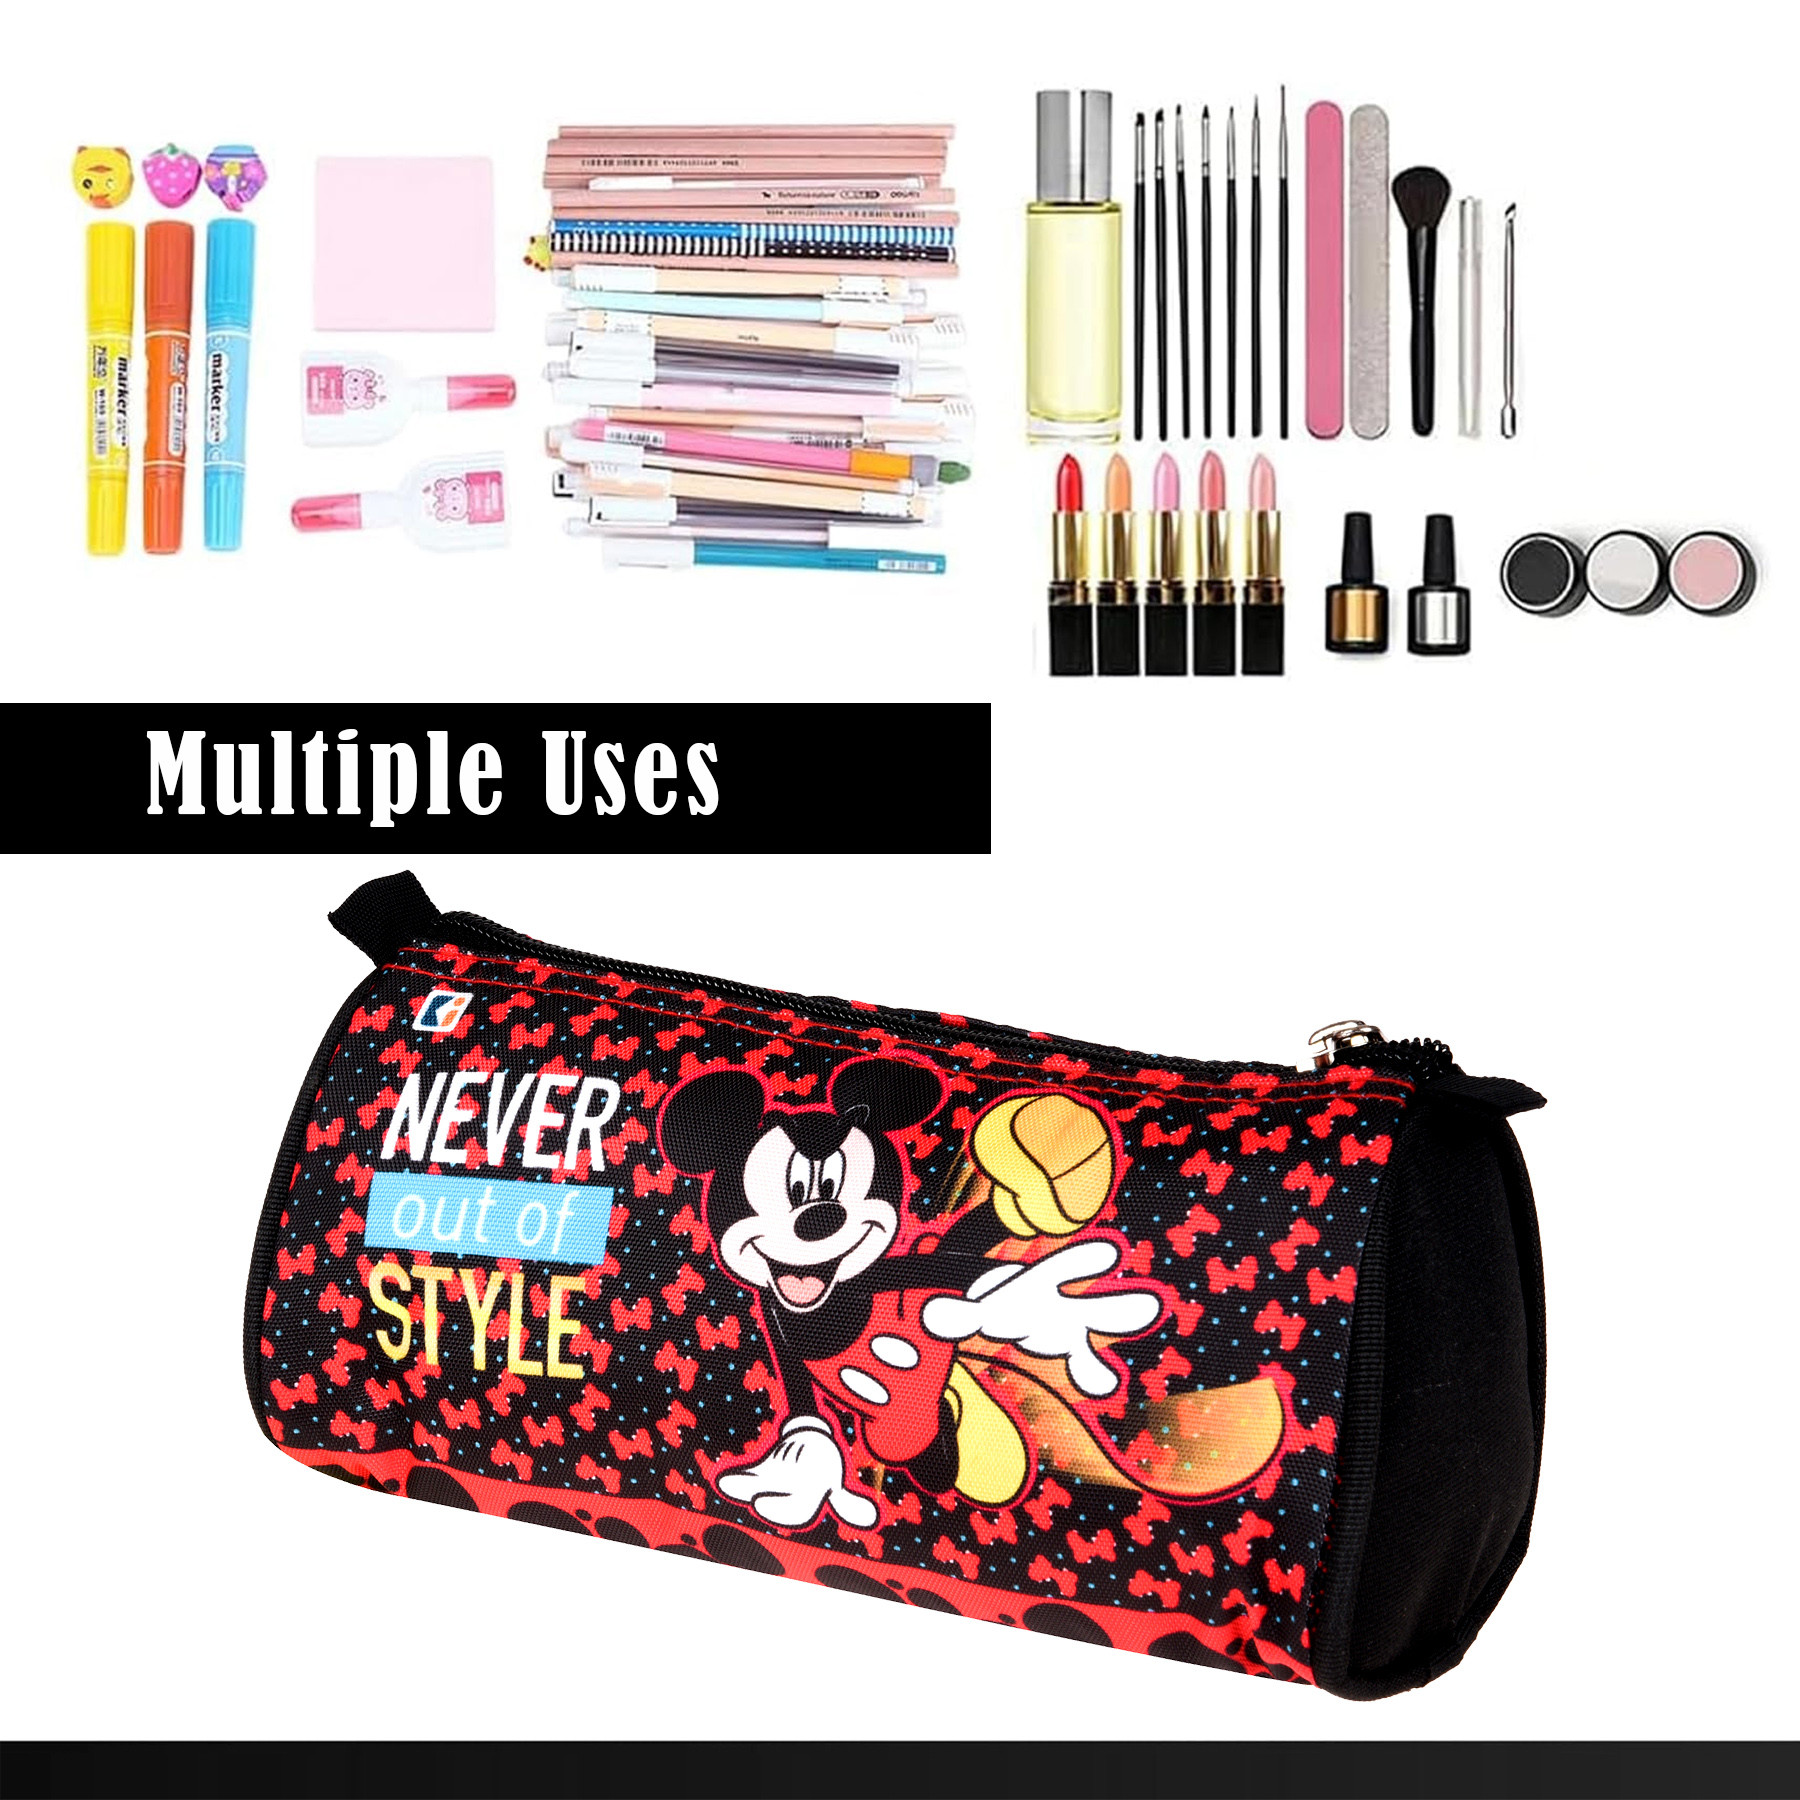 Kuber Industries Pencil Pouch | Multi-Purpose Travel Pouch | Kids Stationary Storage Bag | Pencil Utility School Pouches | Geometry Box | Disney Mickey | Large | Black